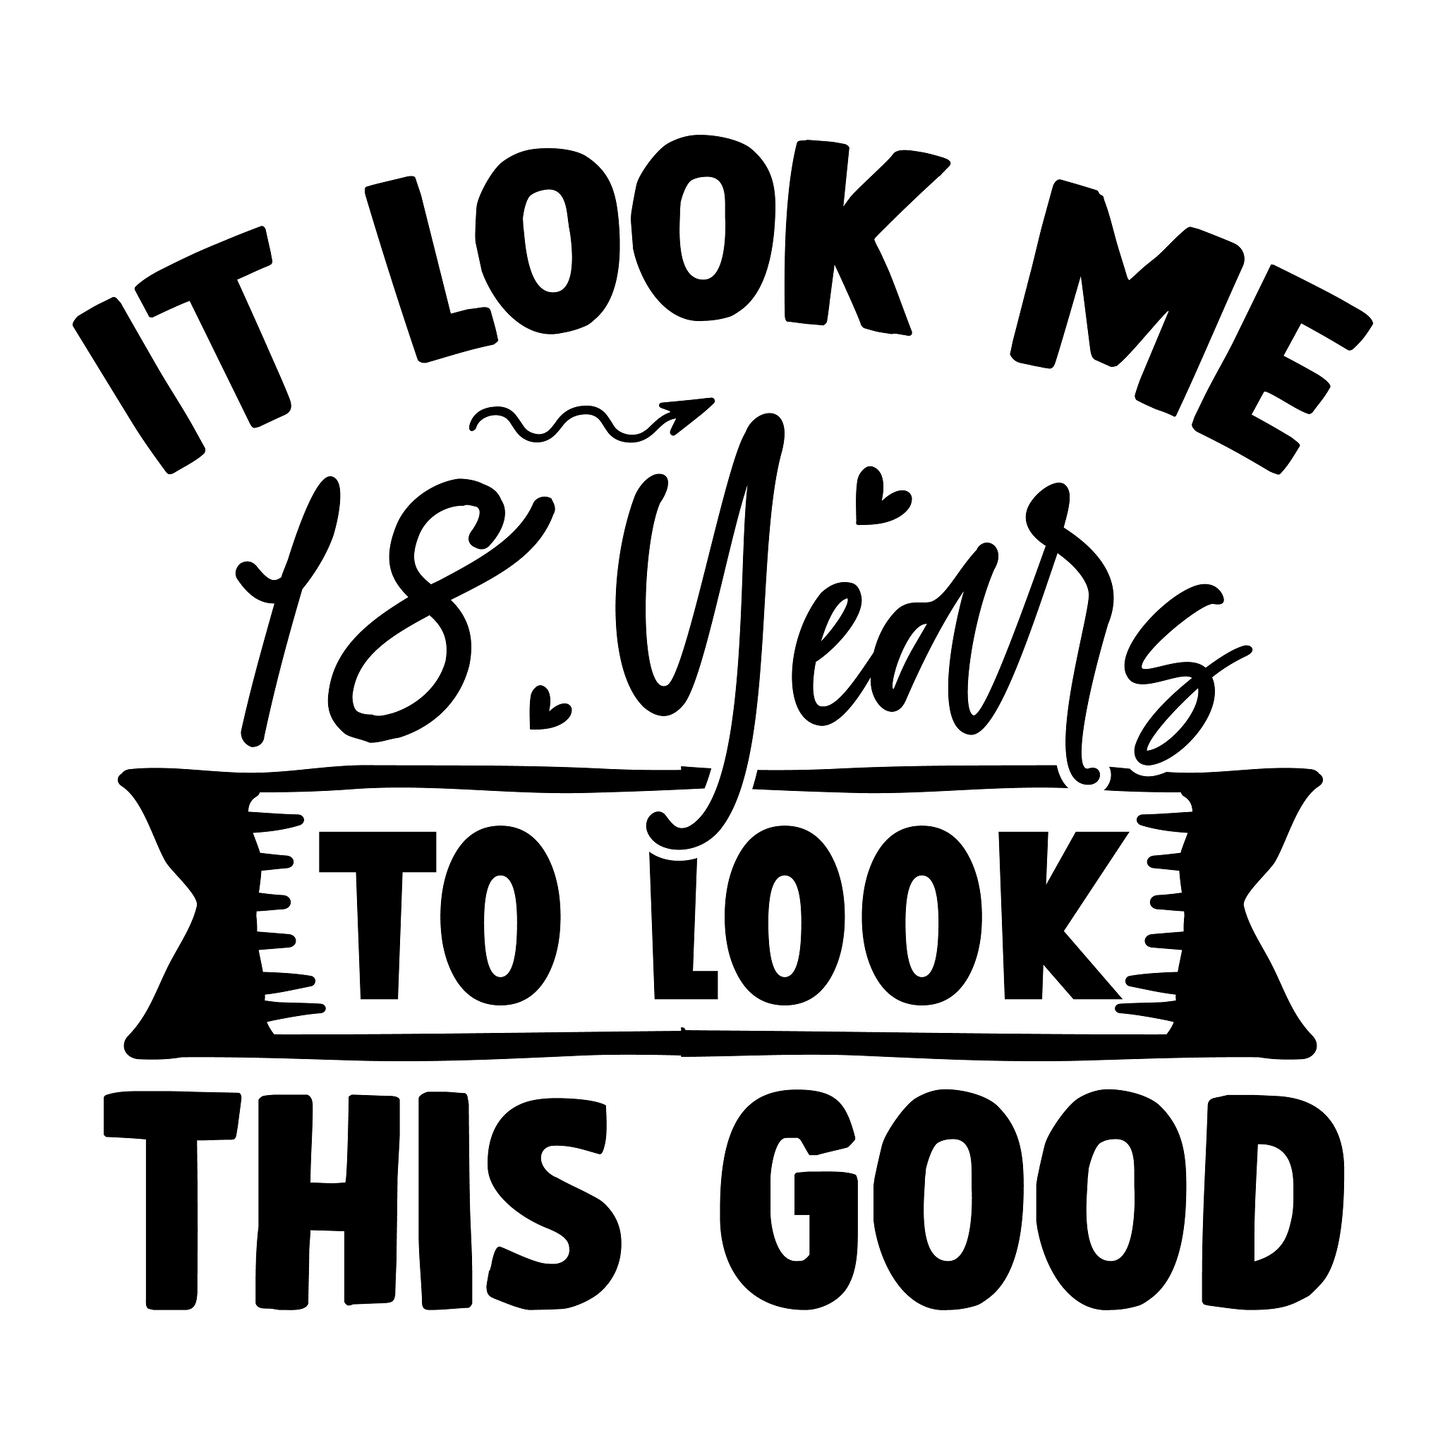 Inspirational Quote "It Look Me 18 Years To Look This Good" Motivational Sticker Vinyl Decal Motivation Stickers- 5" Vinyl Sticker Waterproof